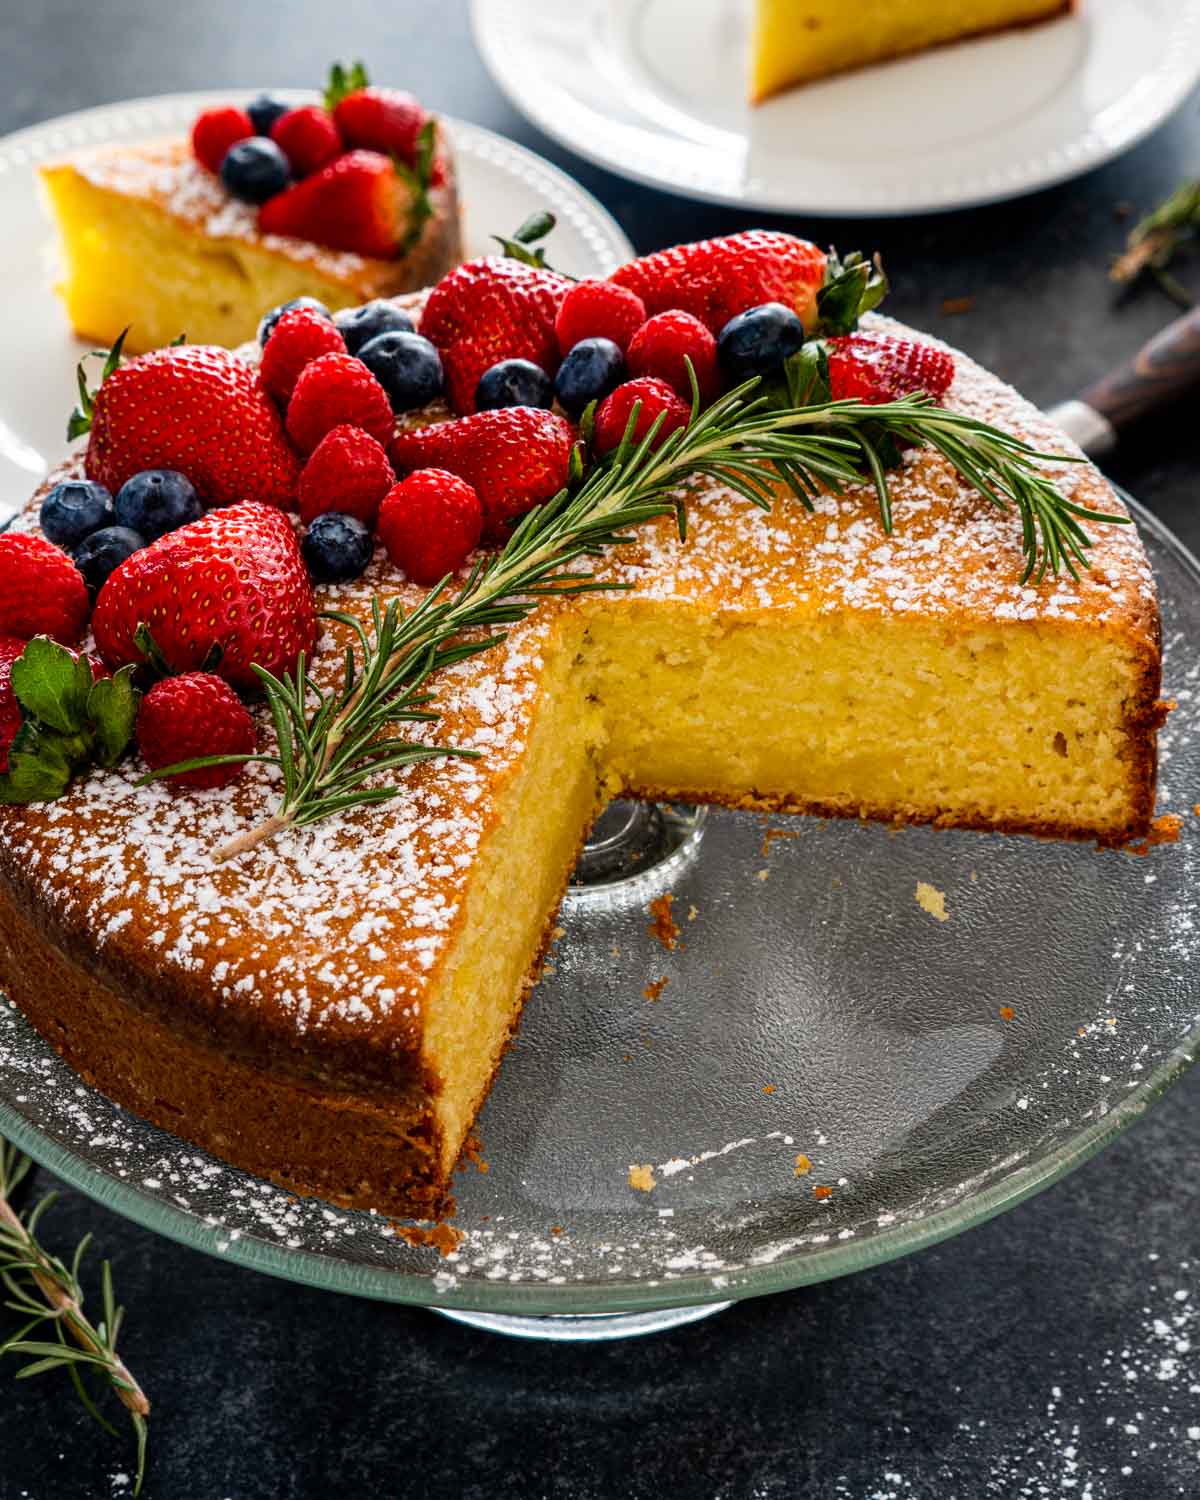 olive oil cake with a few slices cut out of it on a cake platter garnished with berries.